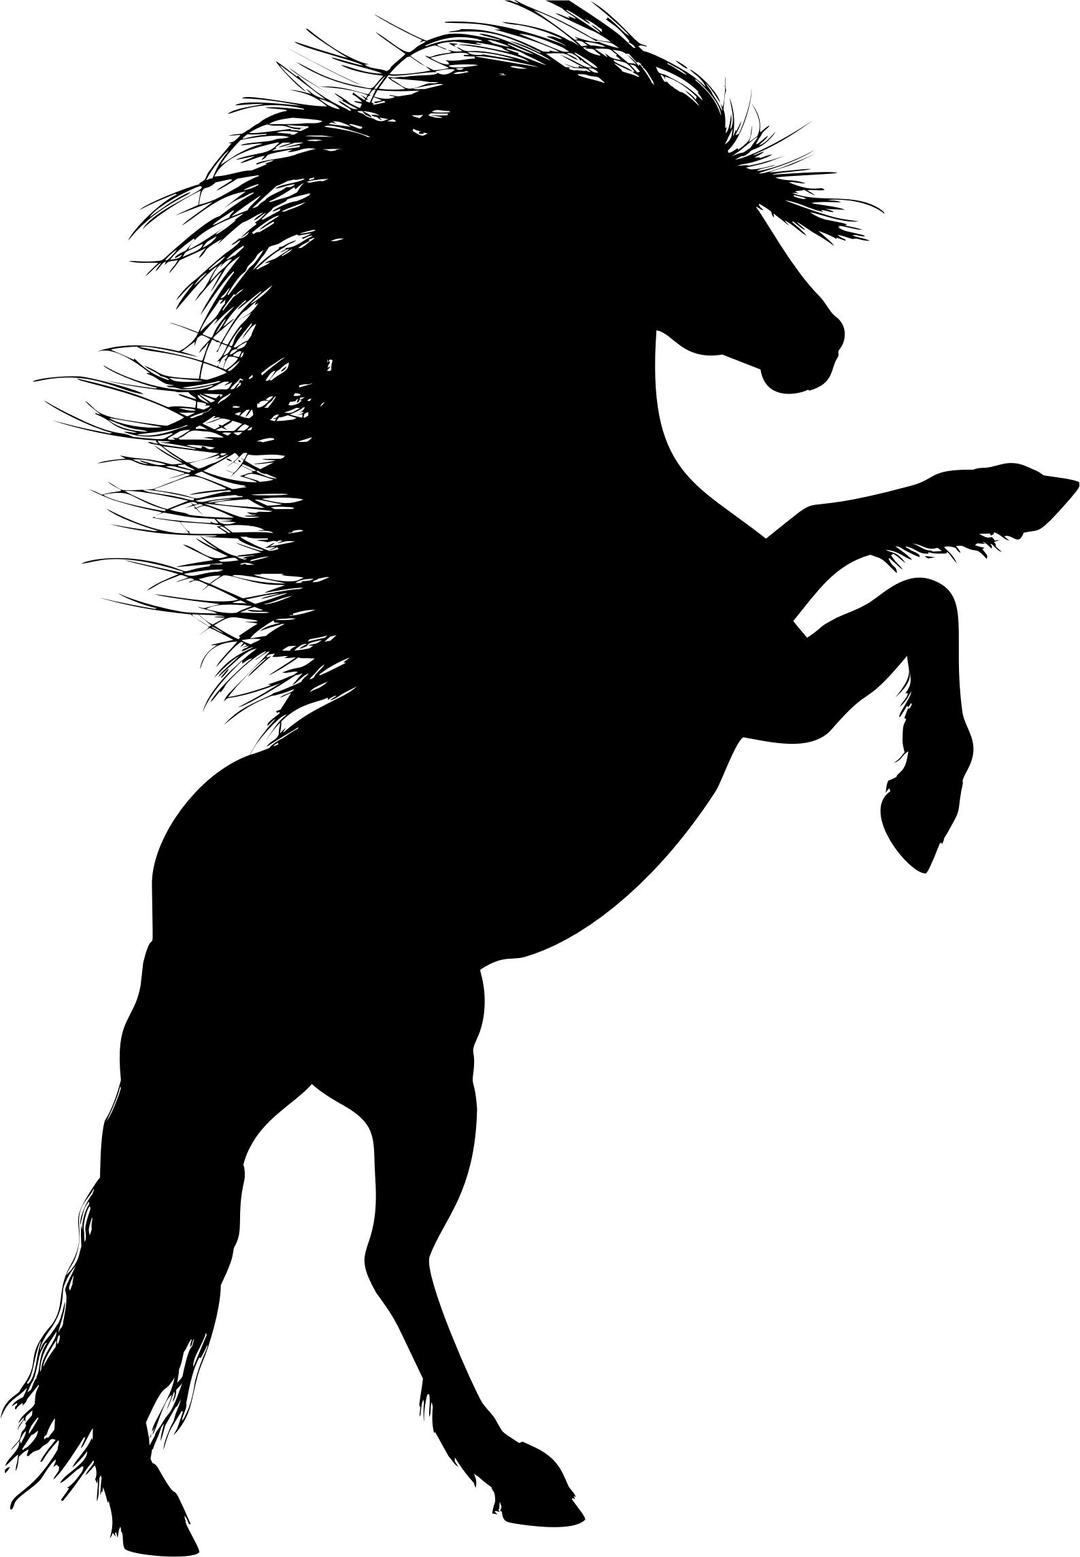 Rearing Stallion Silhouette 2 Variation 2 png transparent